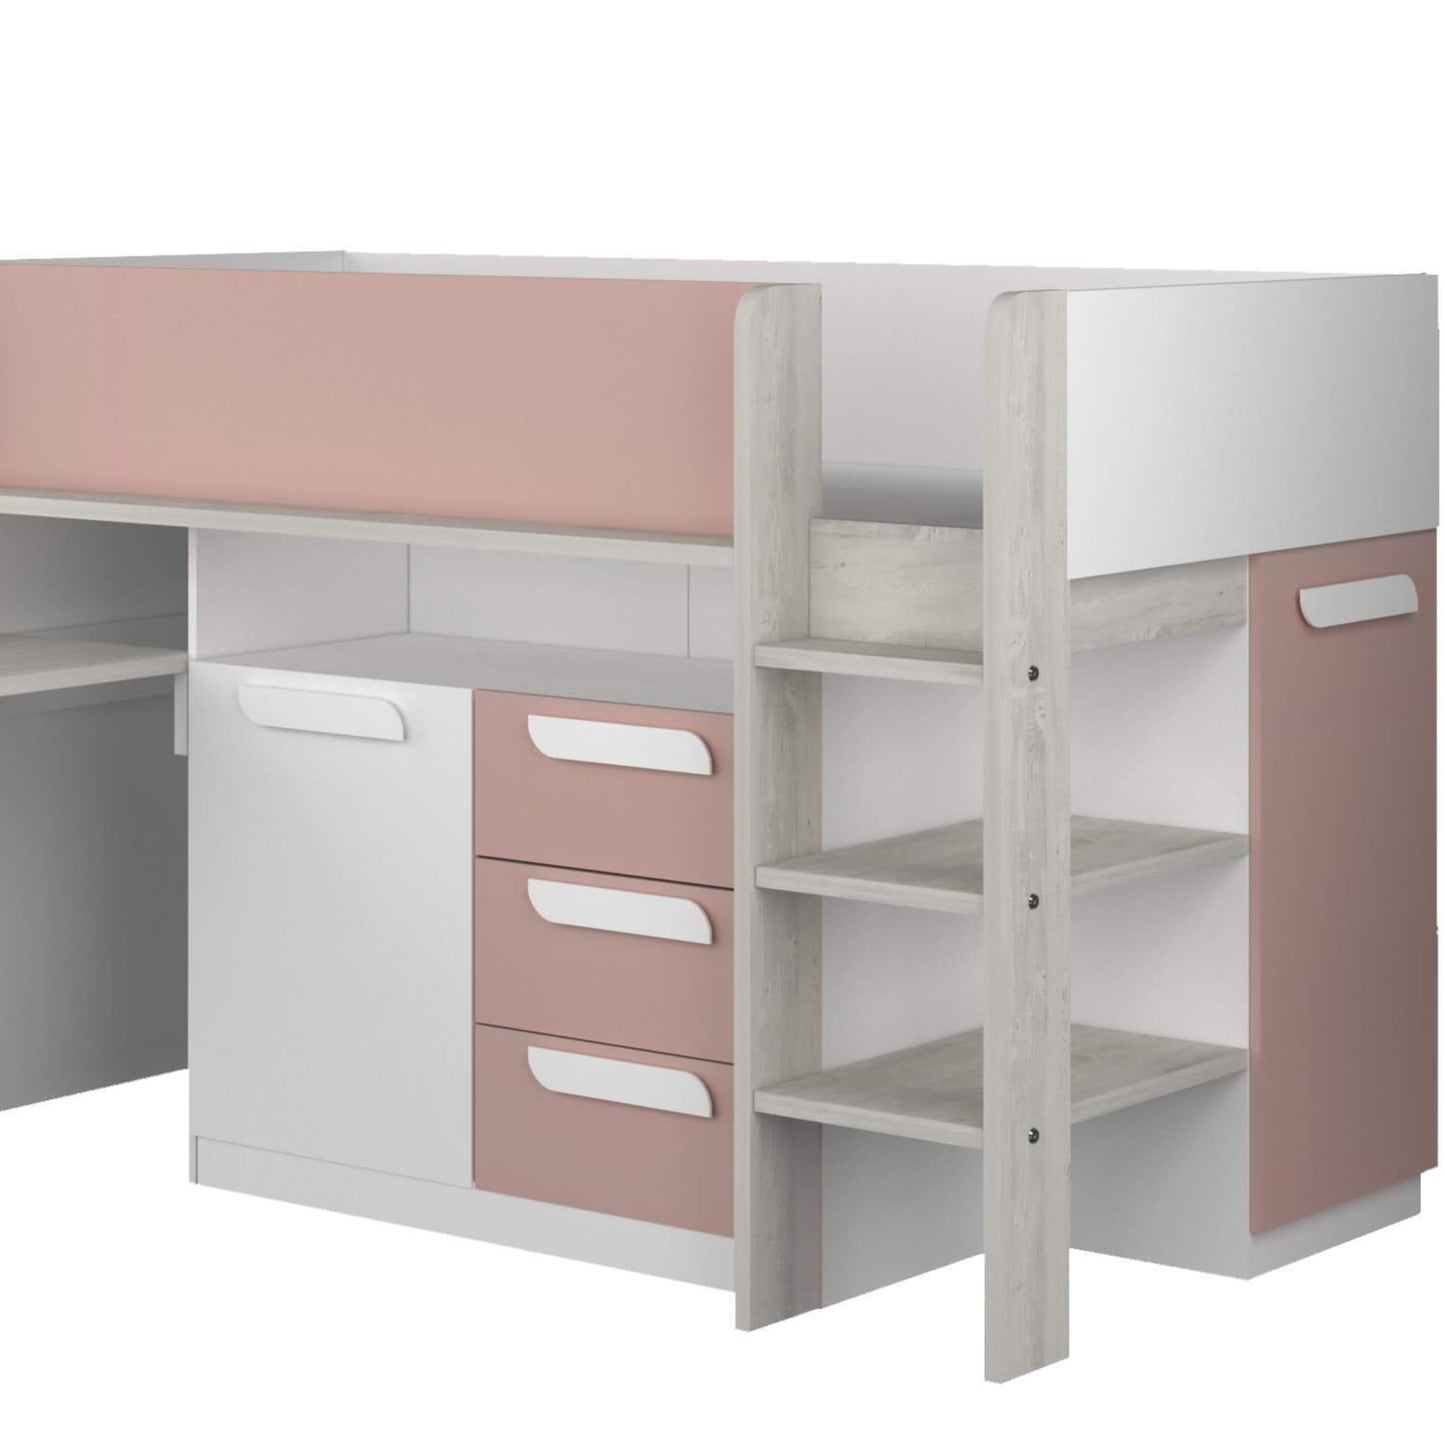 Girona Mid Sleeper Bed with Pull Out Desk Cupboard & Drawers In Pink Cut Out